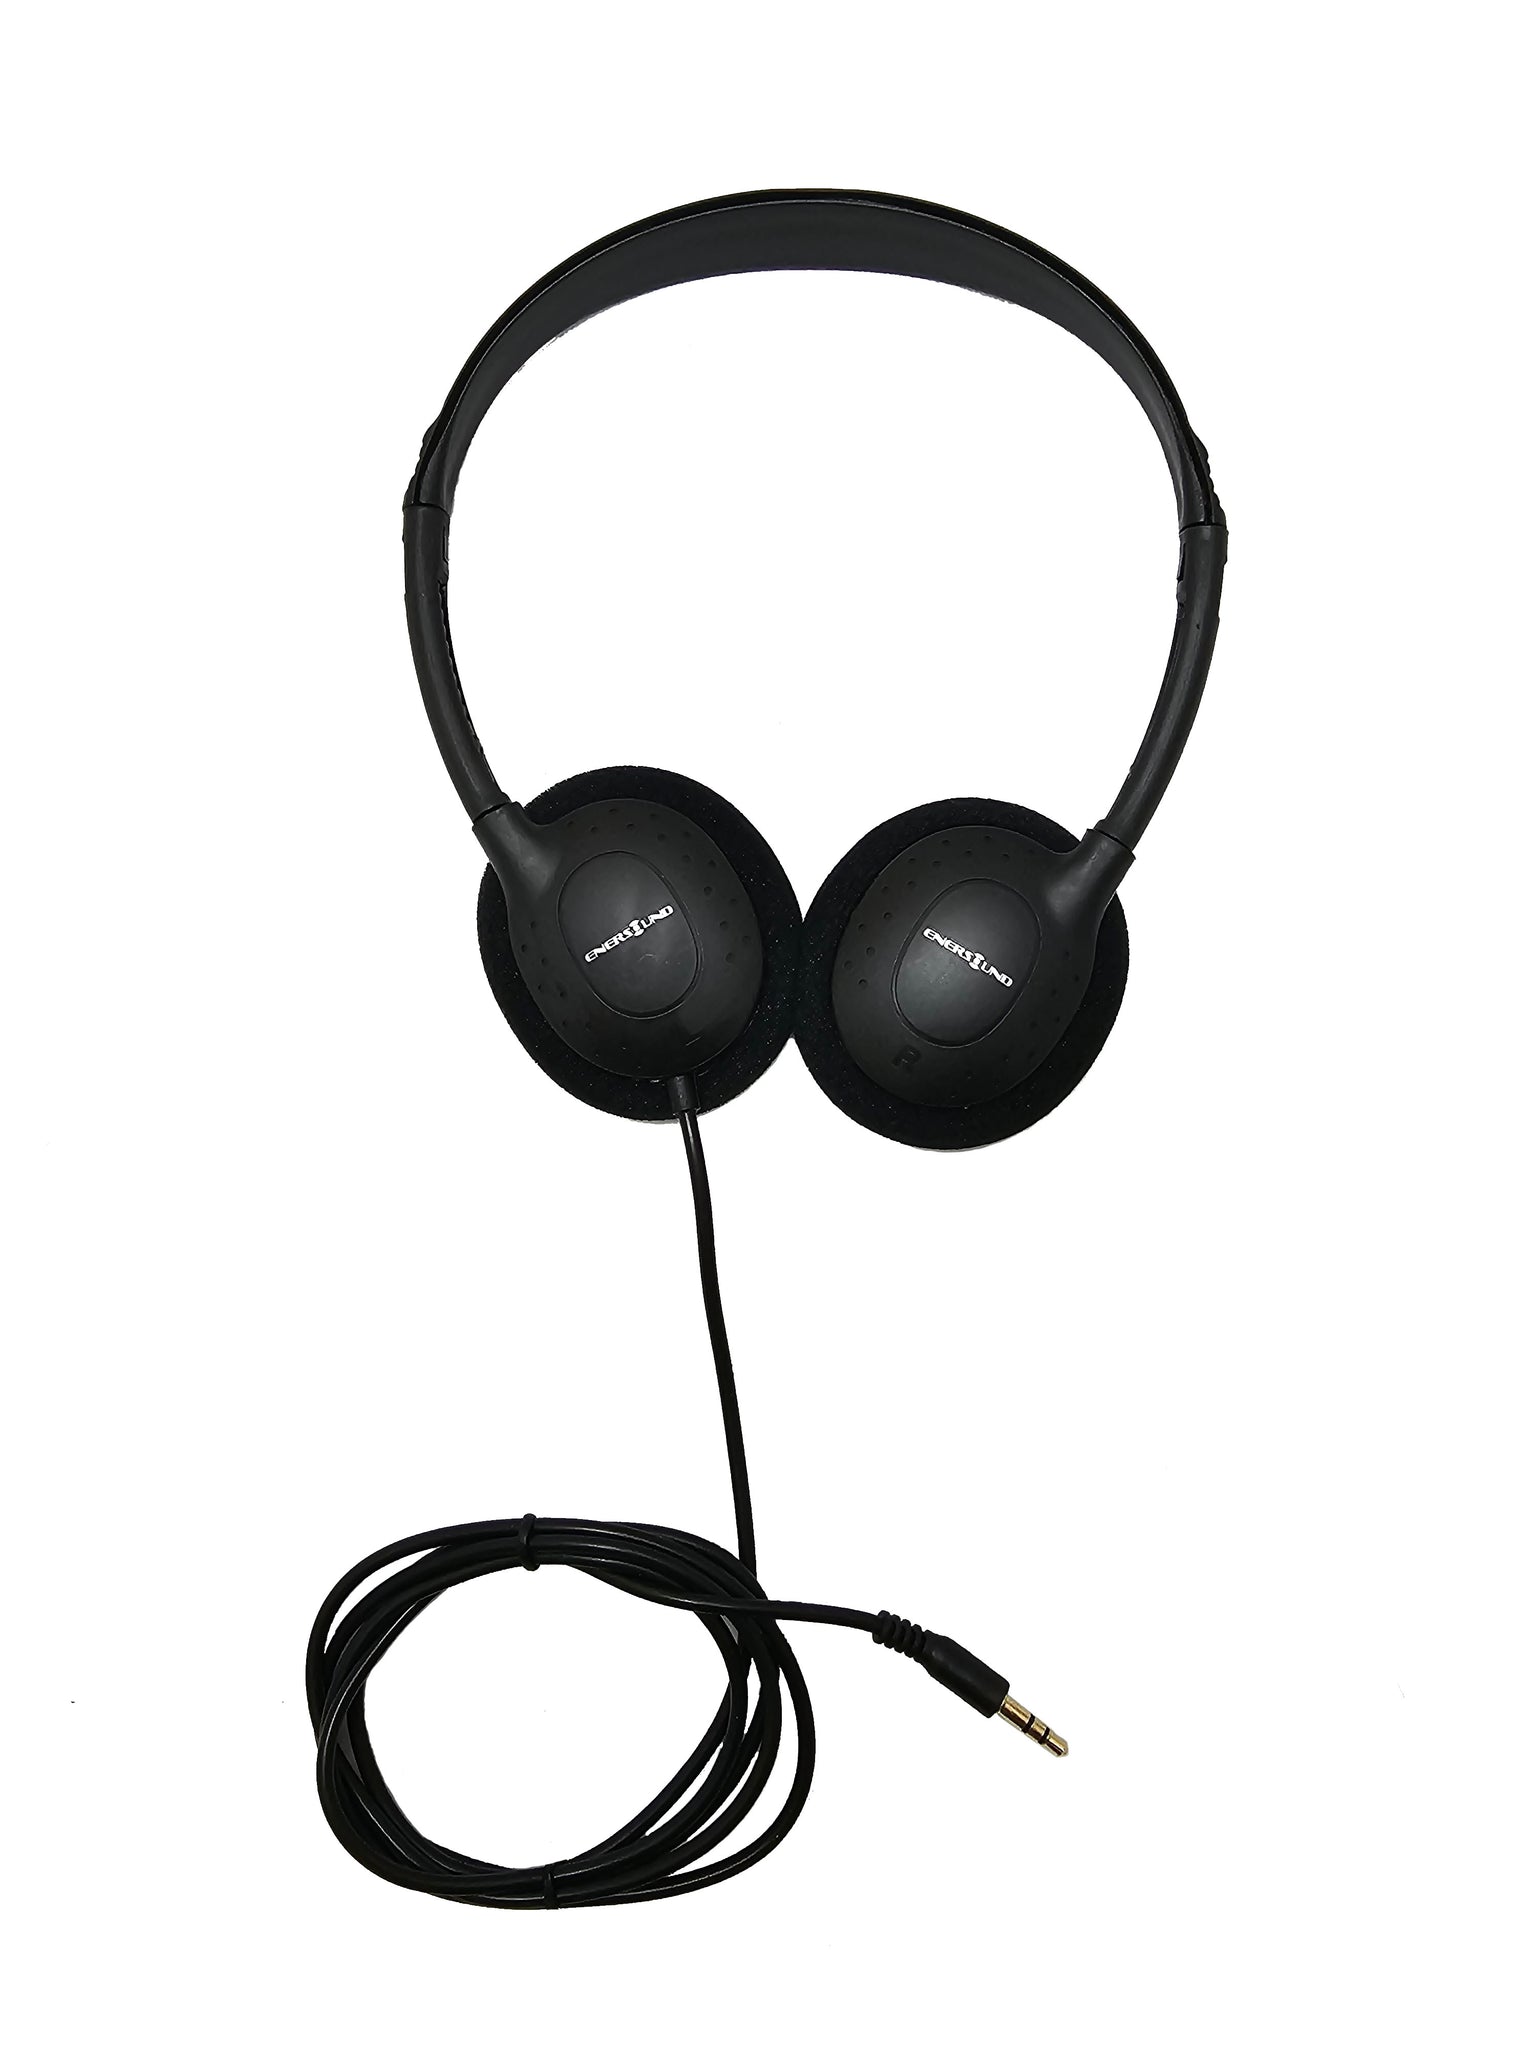 Enersound HEAD-702 Premium Foldable Headphones with reinforced cable and HiFi Speakers